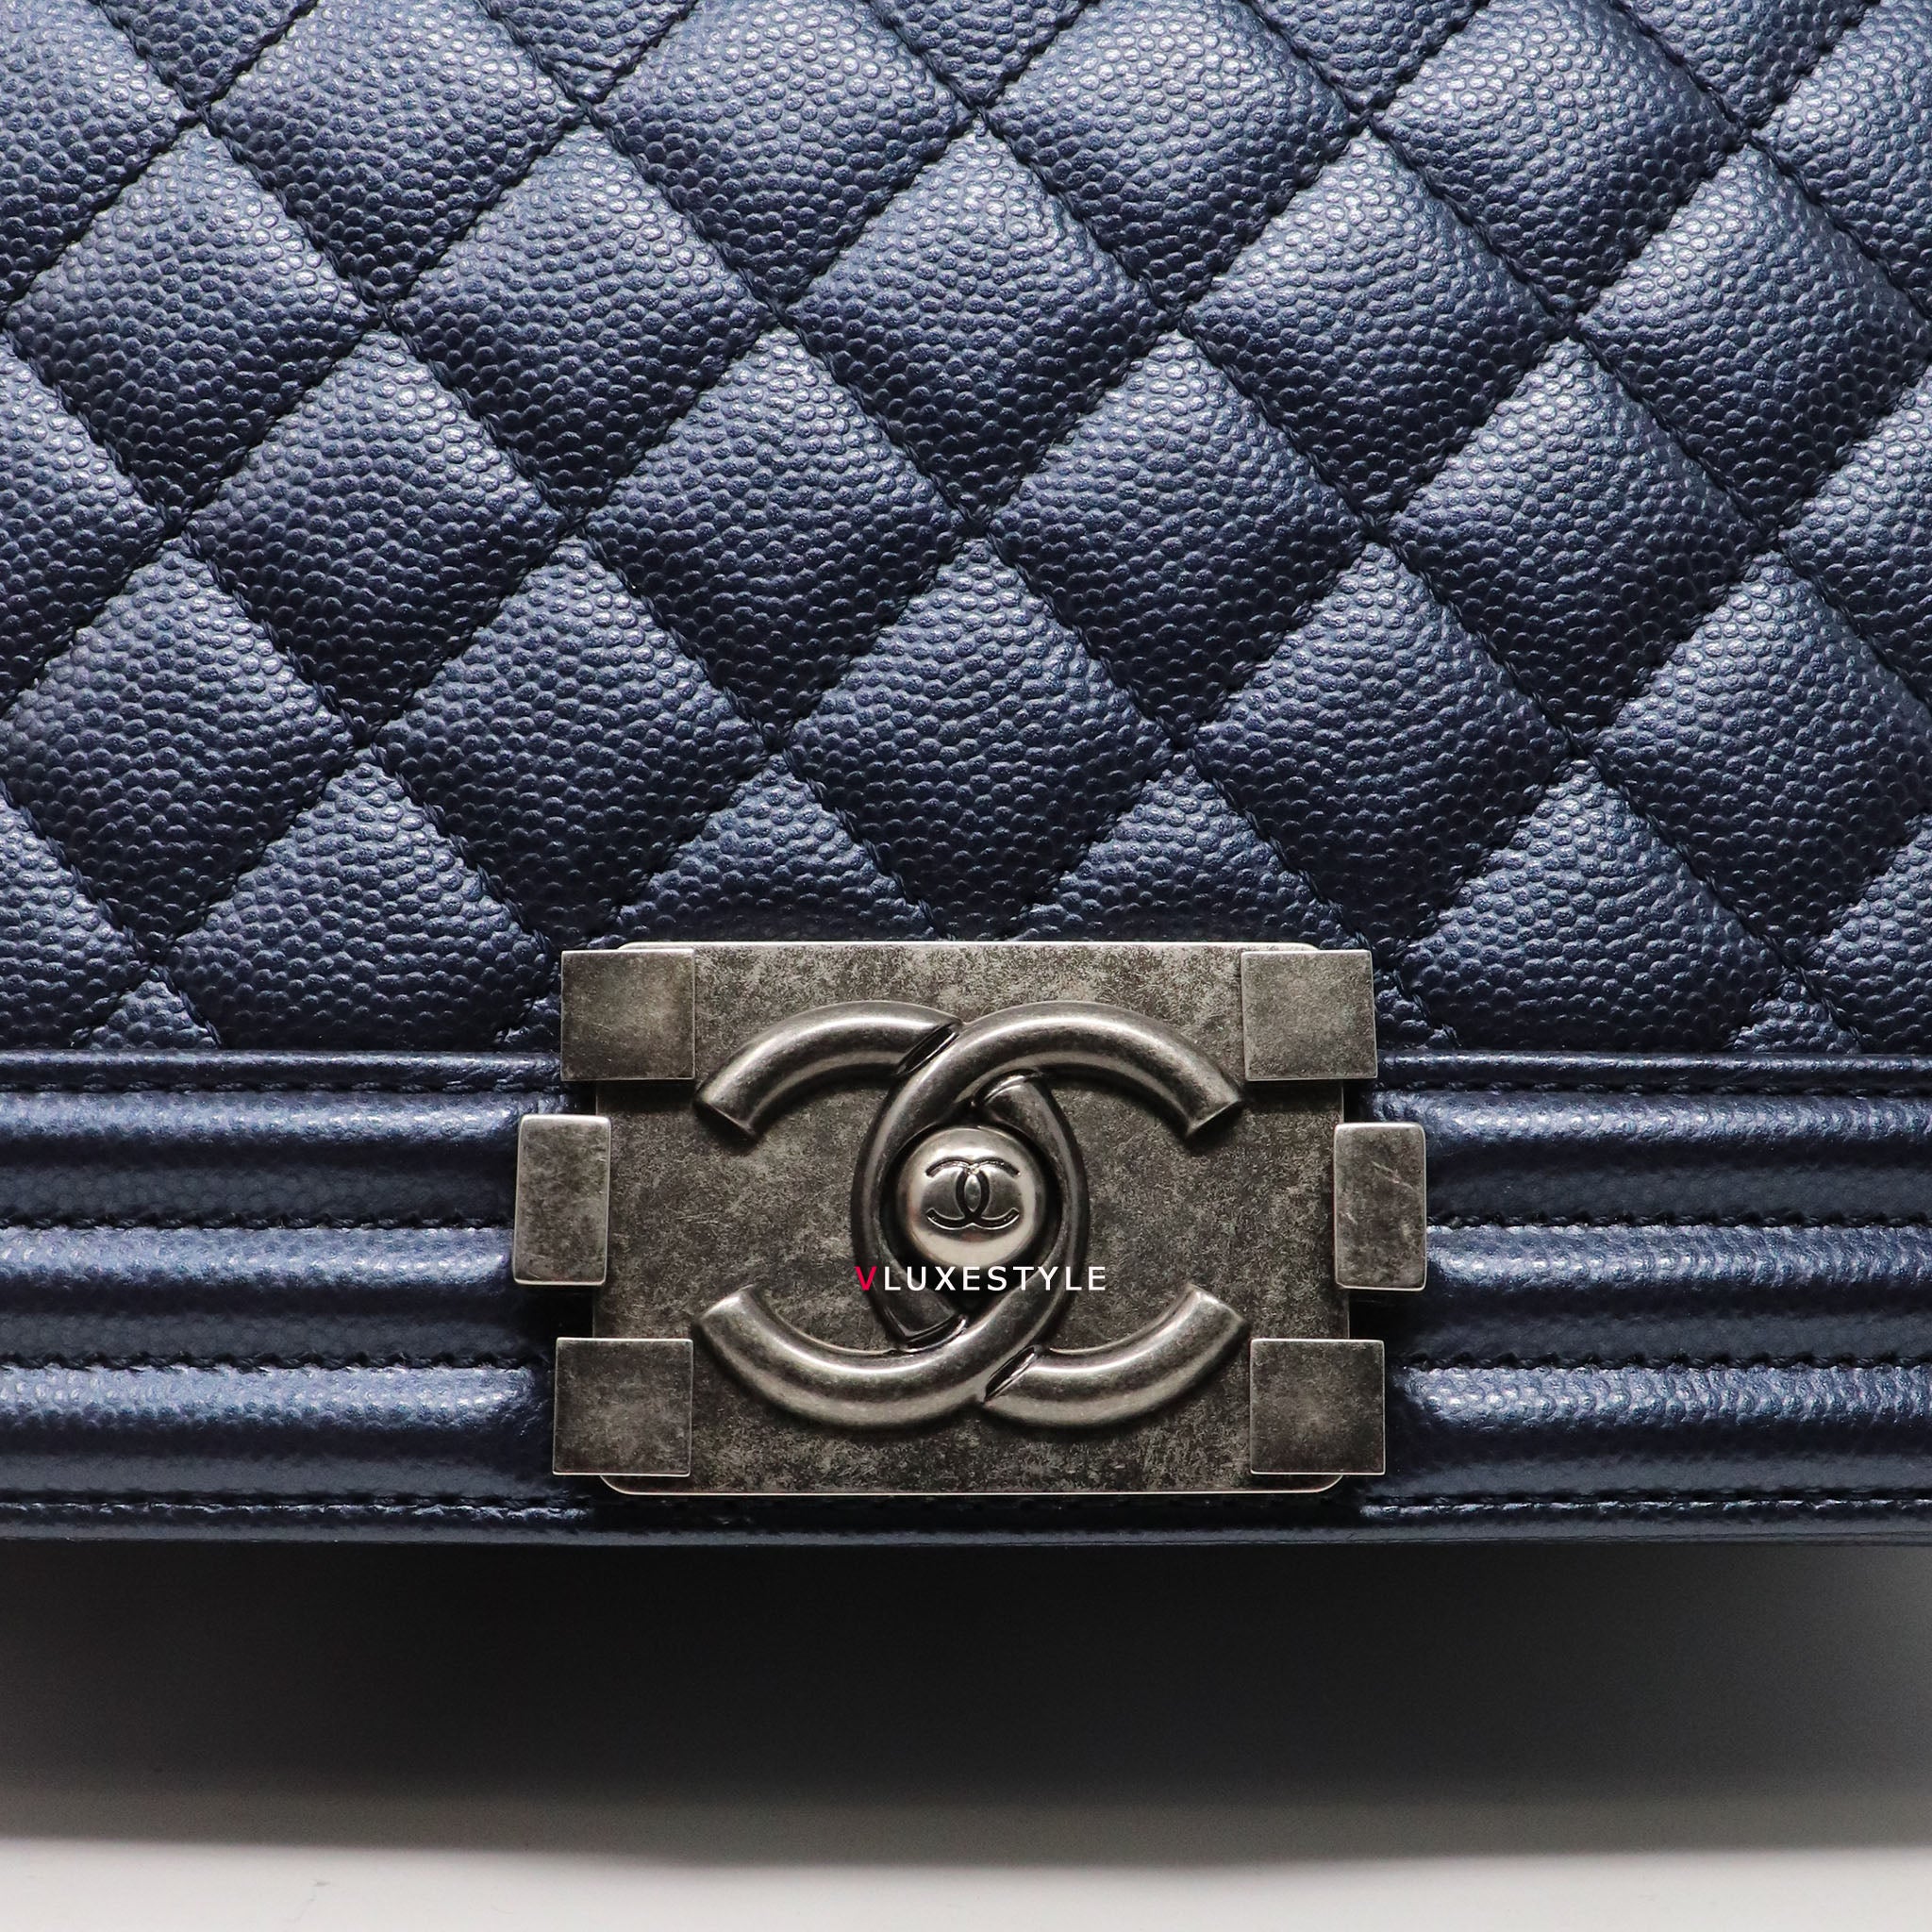 Vintage Chanel Caviar Leather vs. New Chanel Caviar Leather (and my Chanel  experience in general) — Fairly Curated